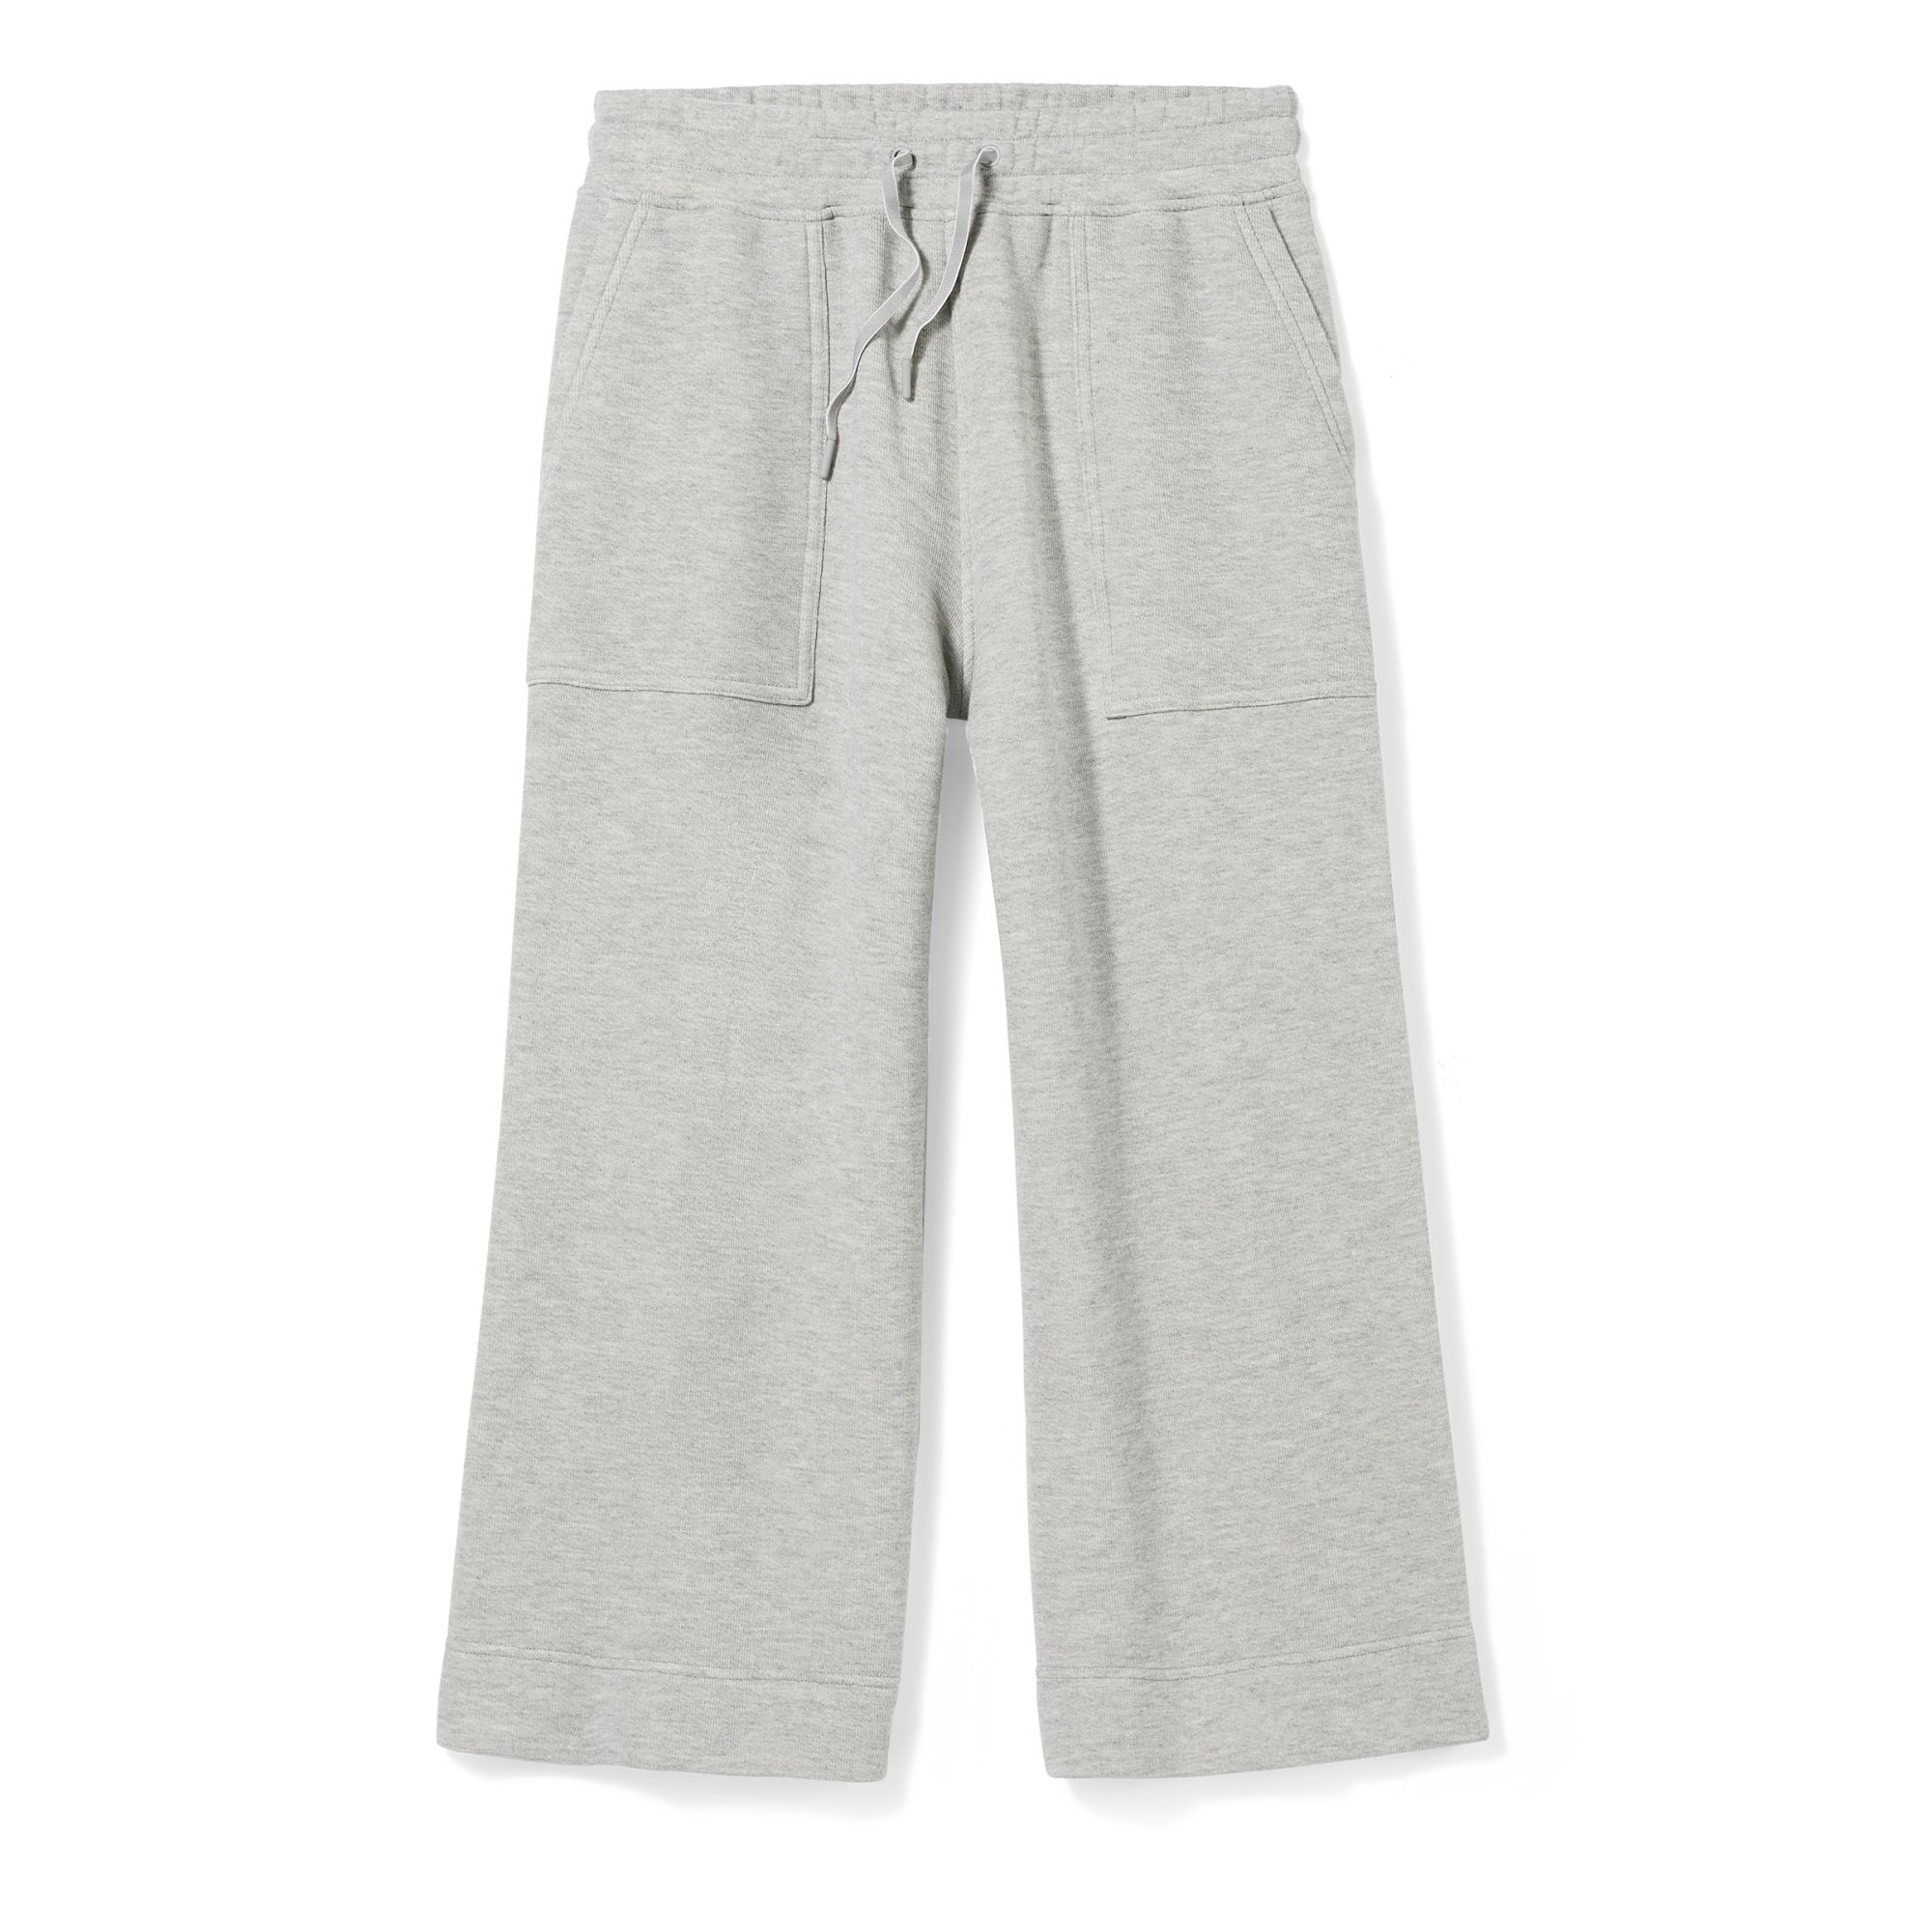 Women's Recycled Terry Crop Wide Leg Pant